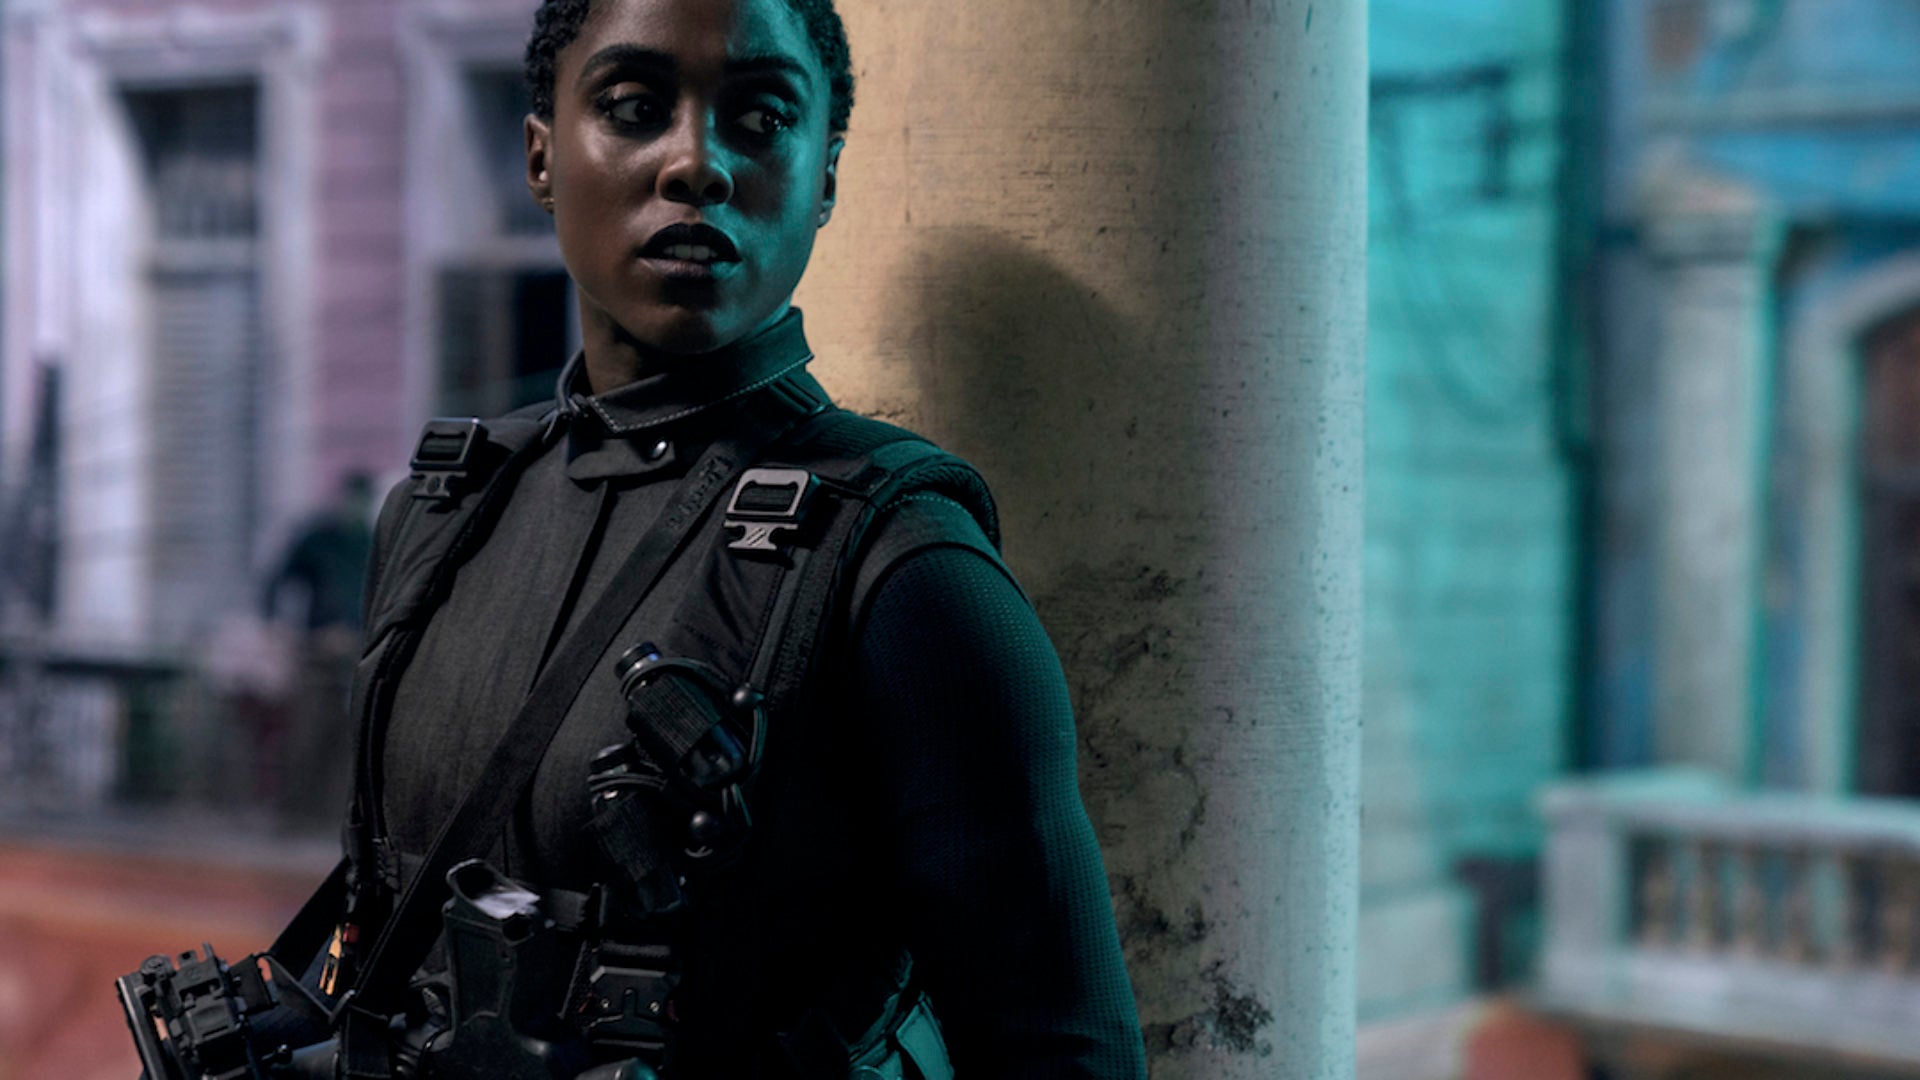 Lashana Lynch Joins Iconic Bond Franchise In 'No Time To Die's' New Trailer